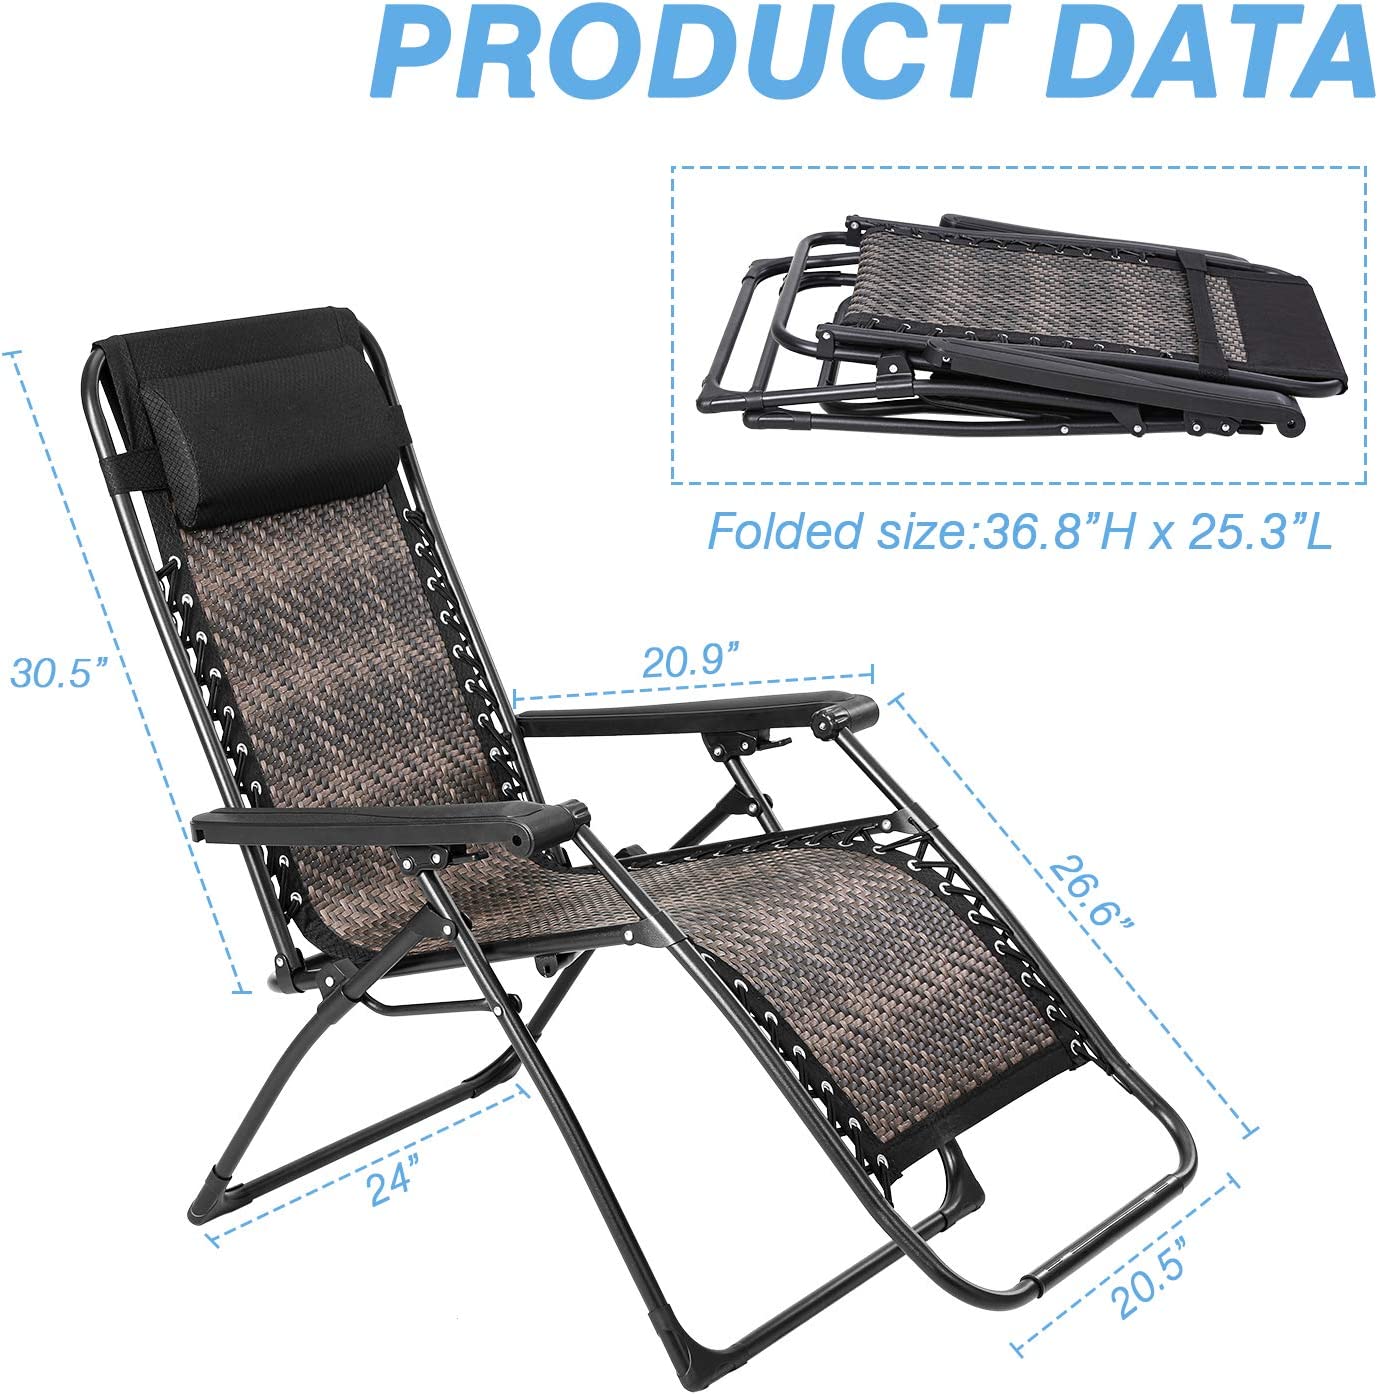 SOLAURA Zero Gravity Chair Outdoor Patio Adjustable Folding Wicker Recliner Lounge Chair - image 3 of 7